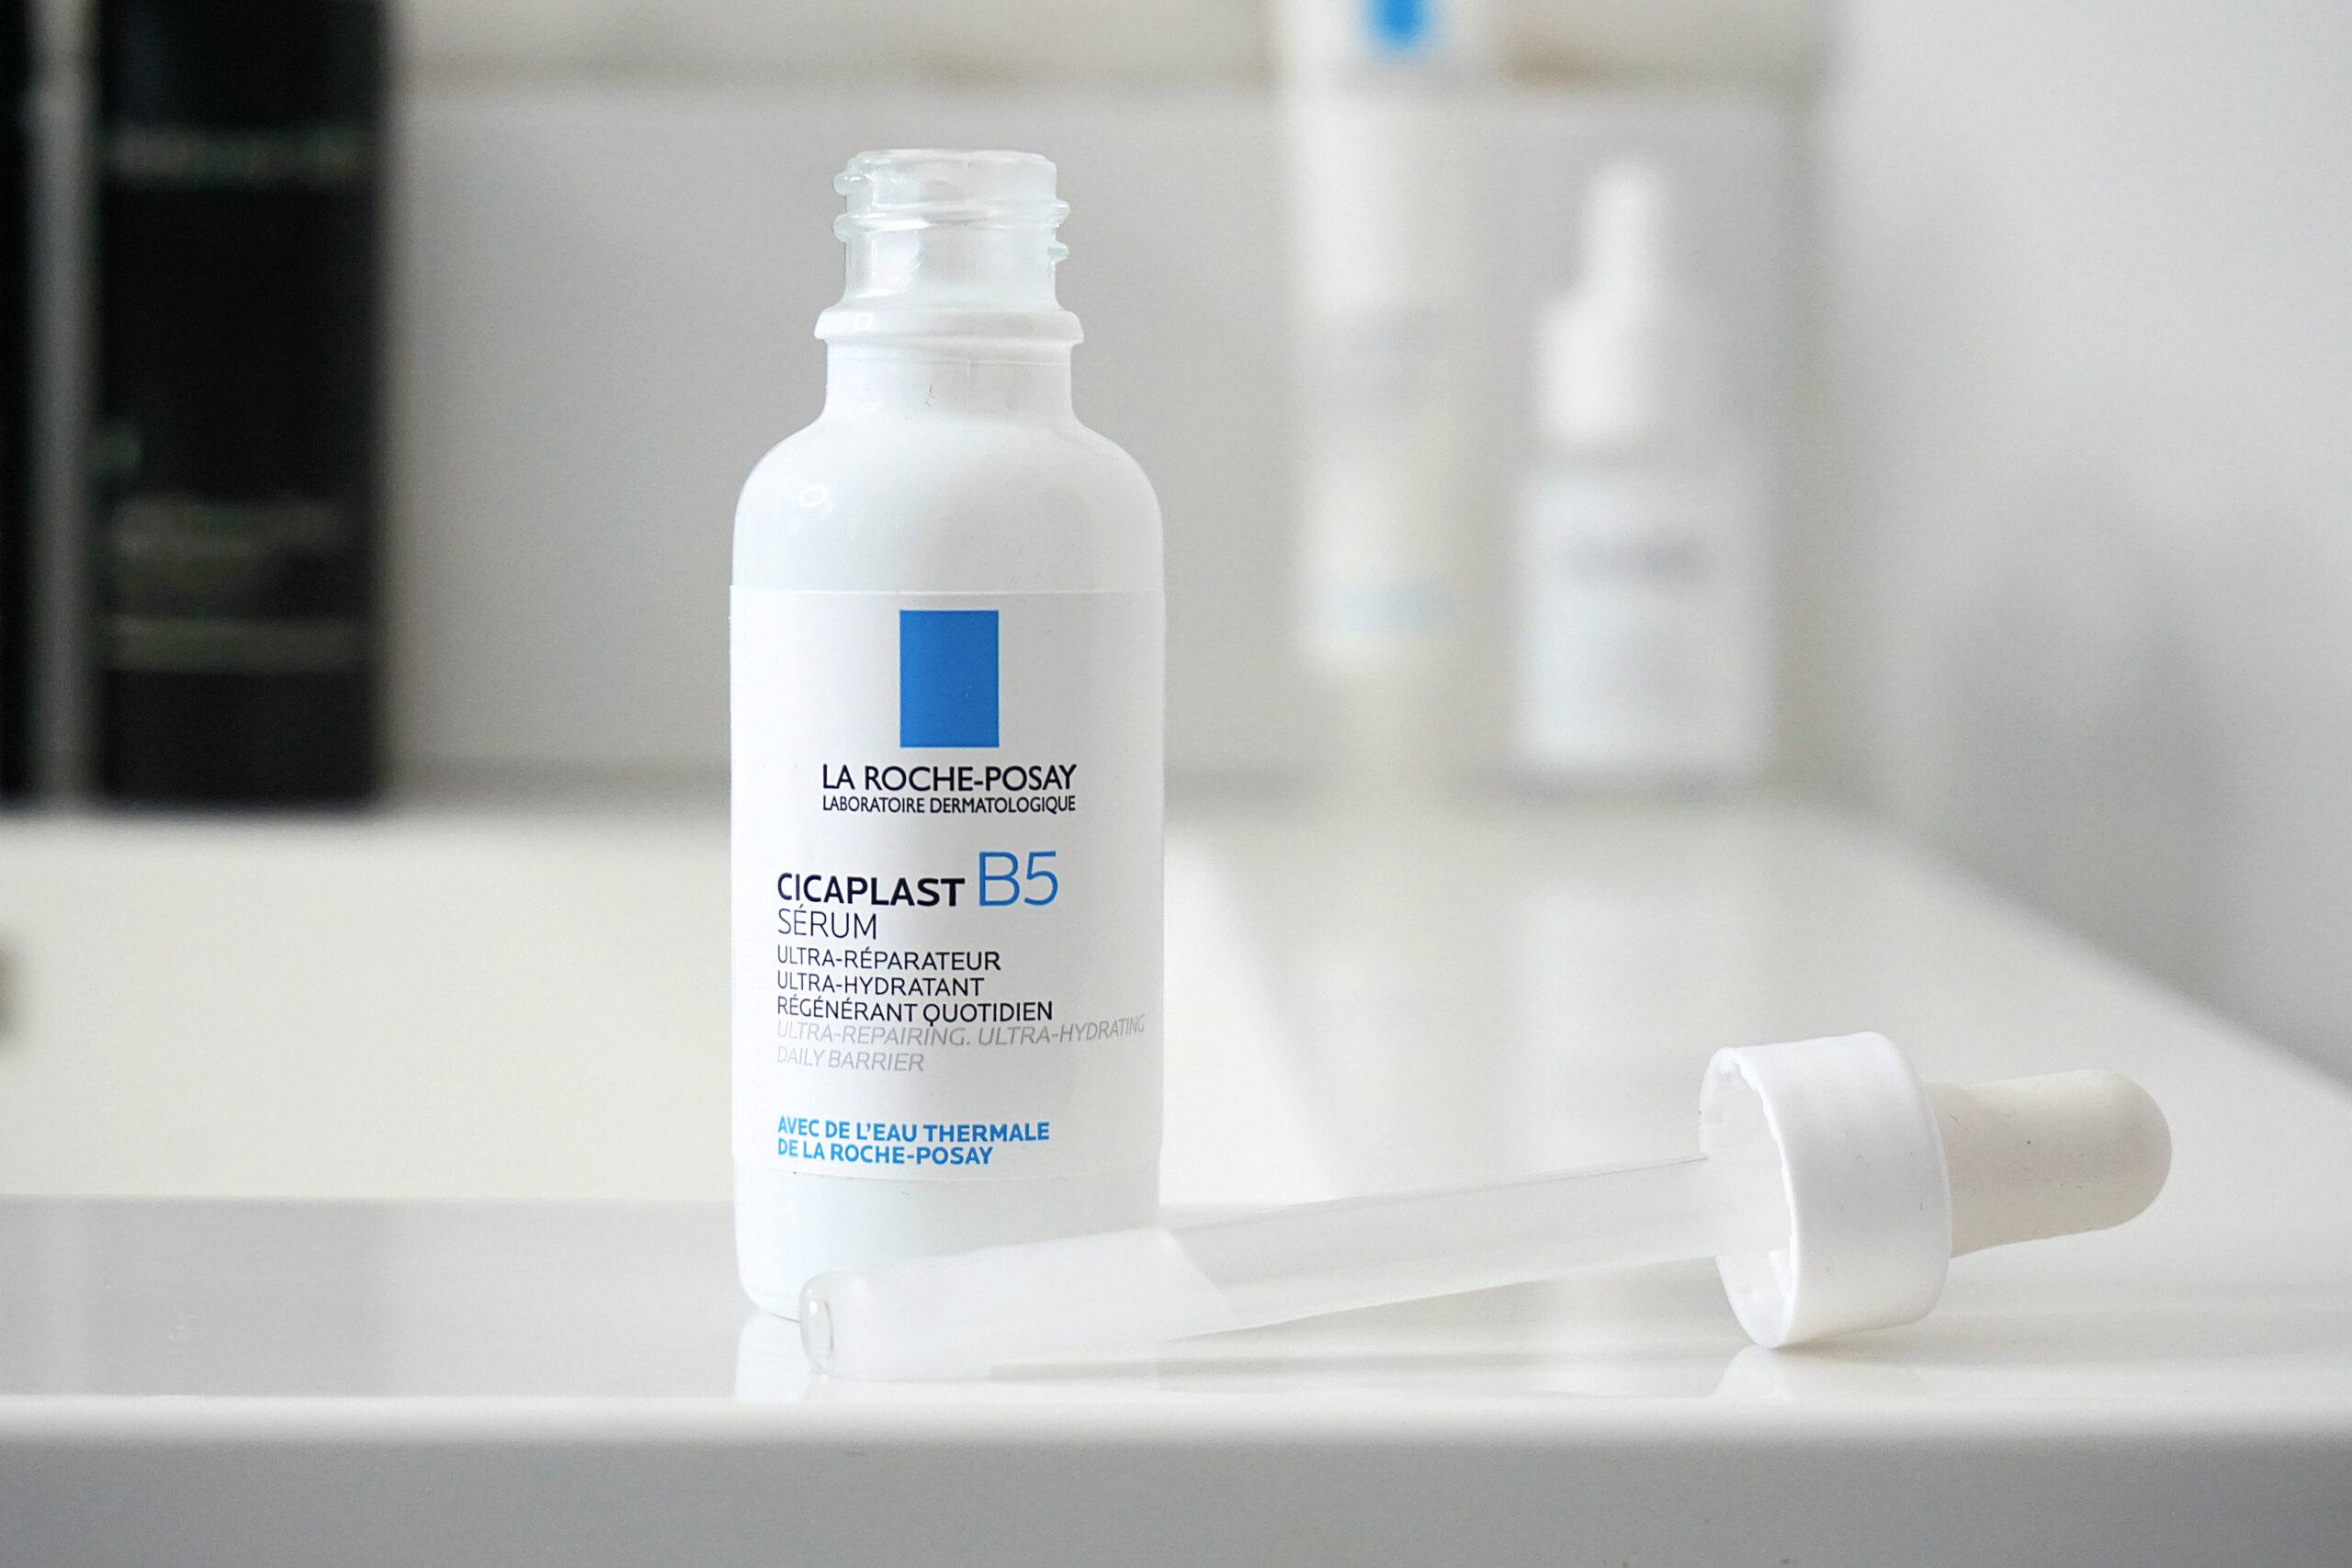 *NEW* La Roche-Posay Cicaplast B5 Serum (Exclusively at Cult Beauty)